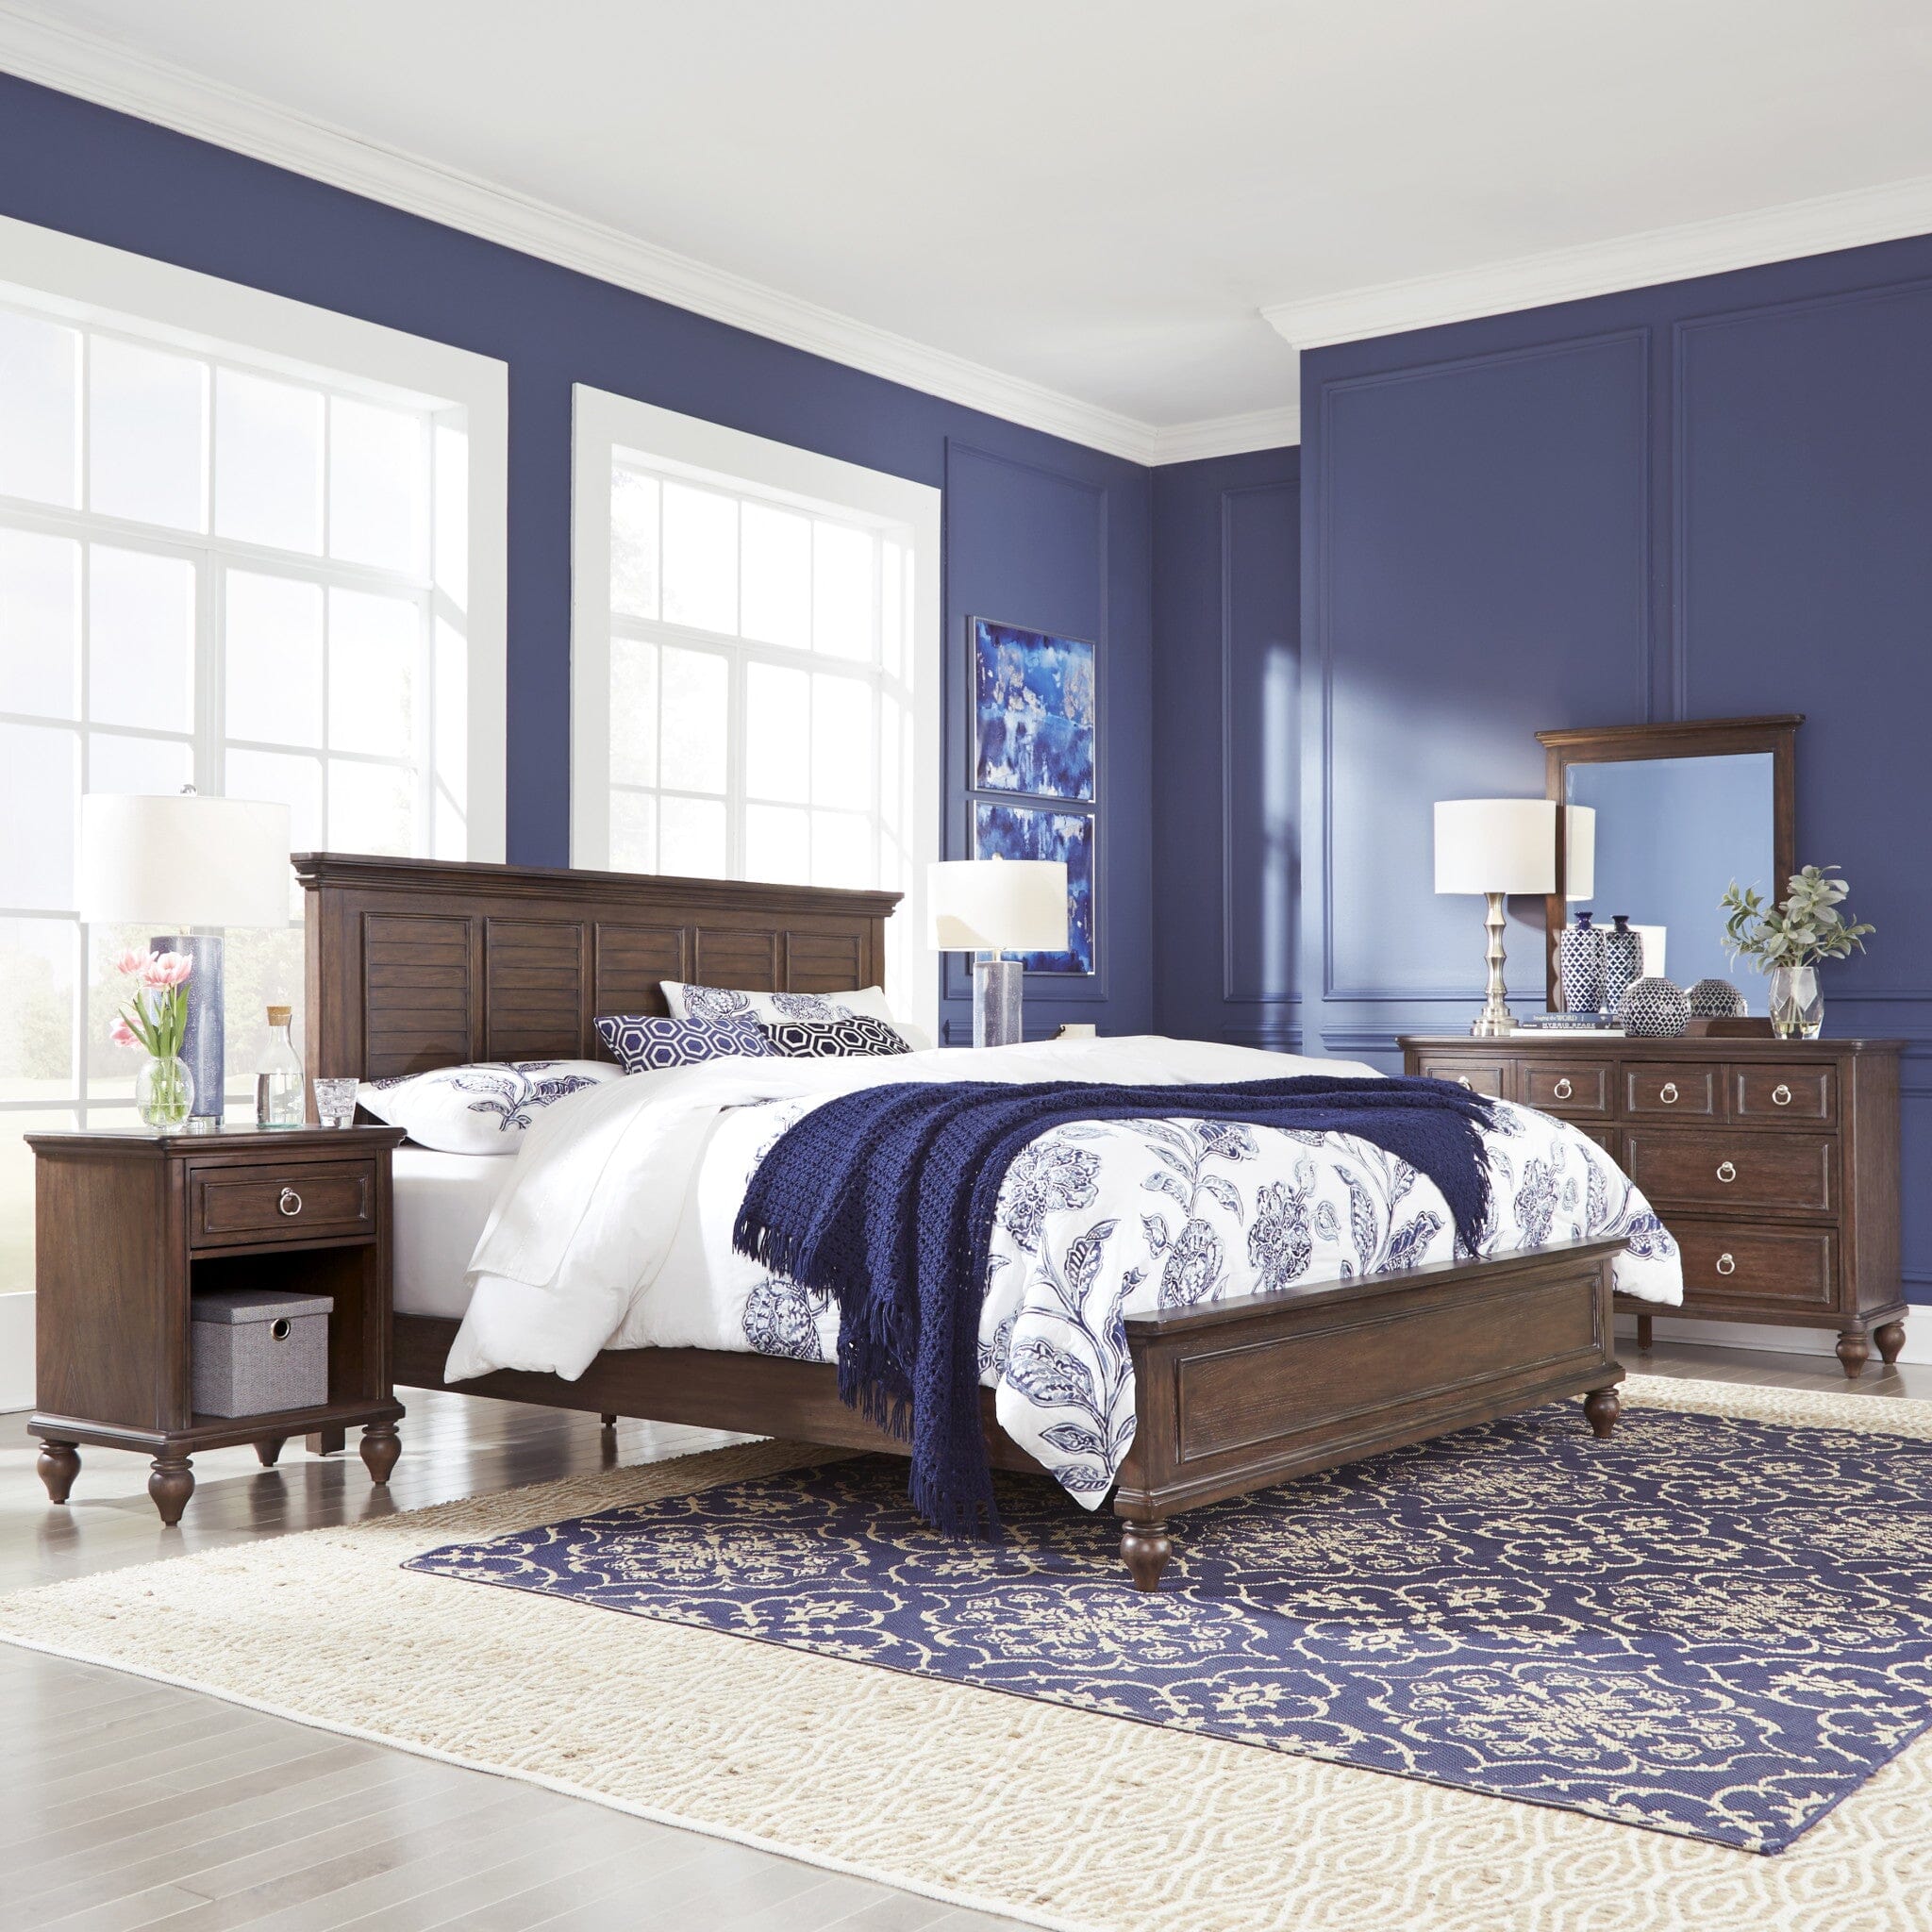 Coastal King Bed, Nightstand and Dresser with Mirror By Southport King Bed Set Southport